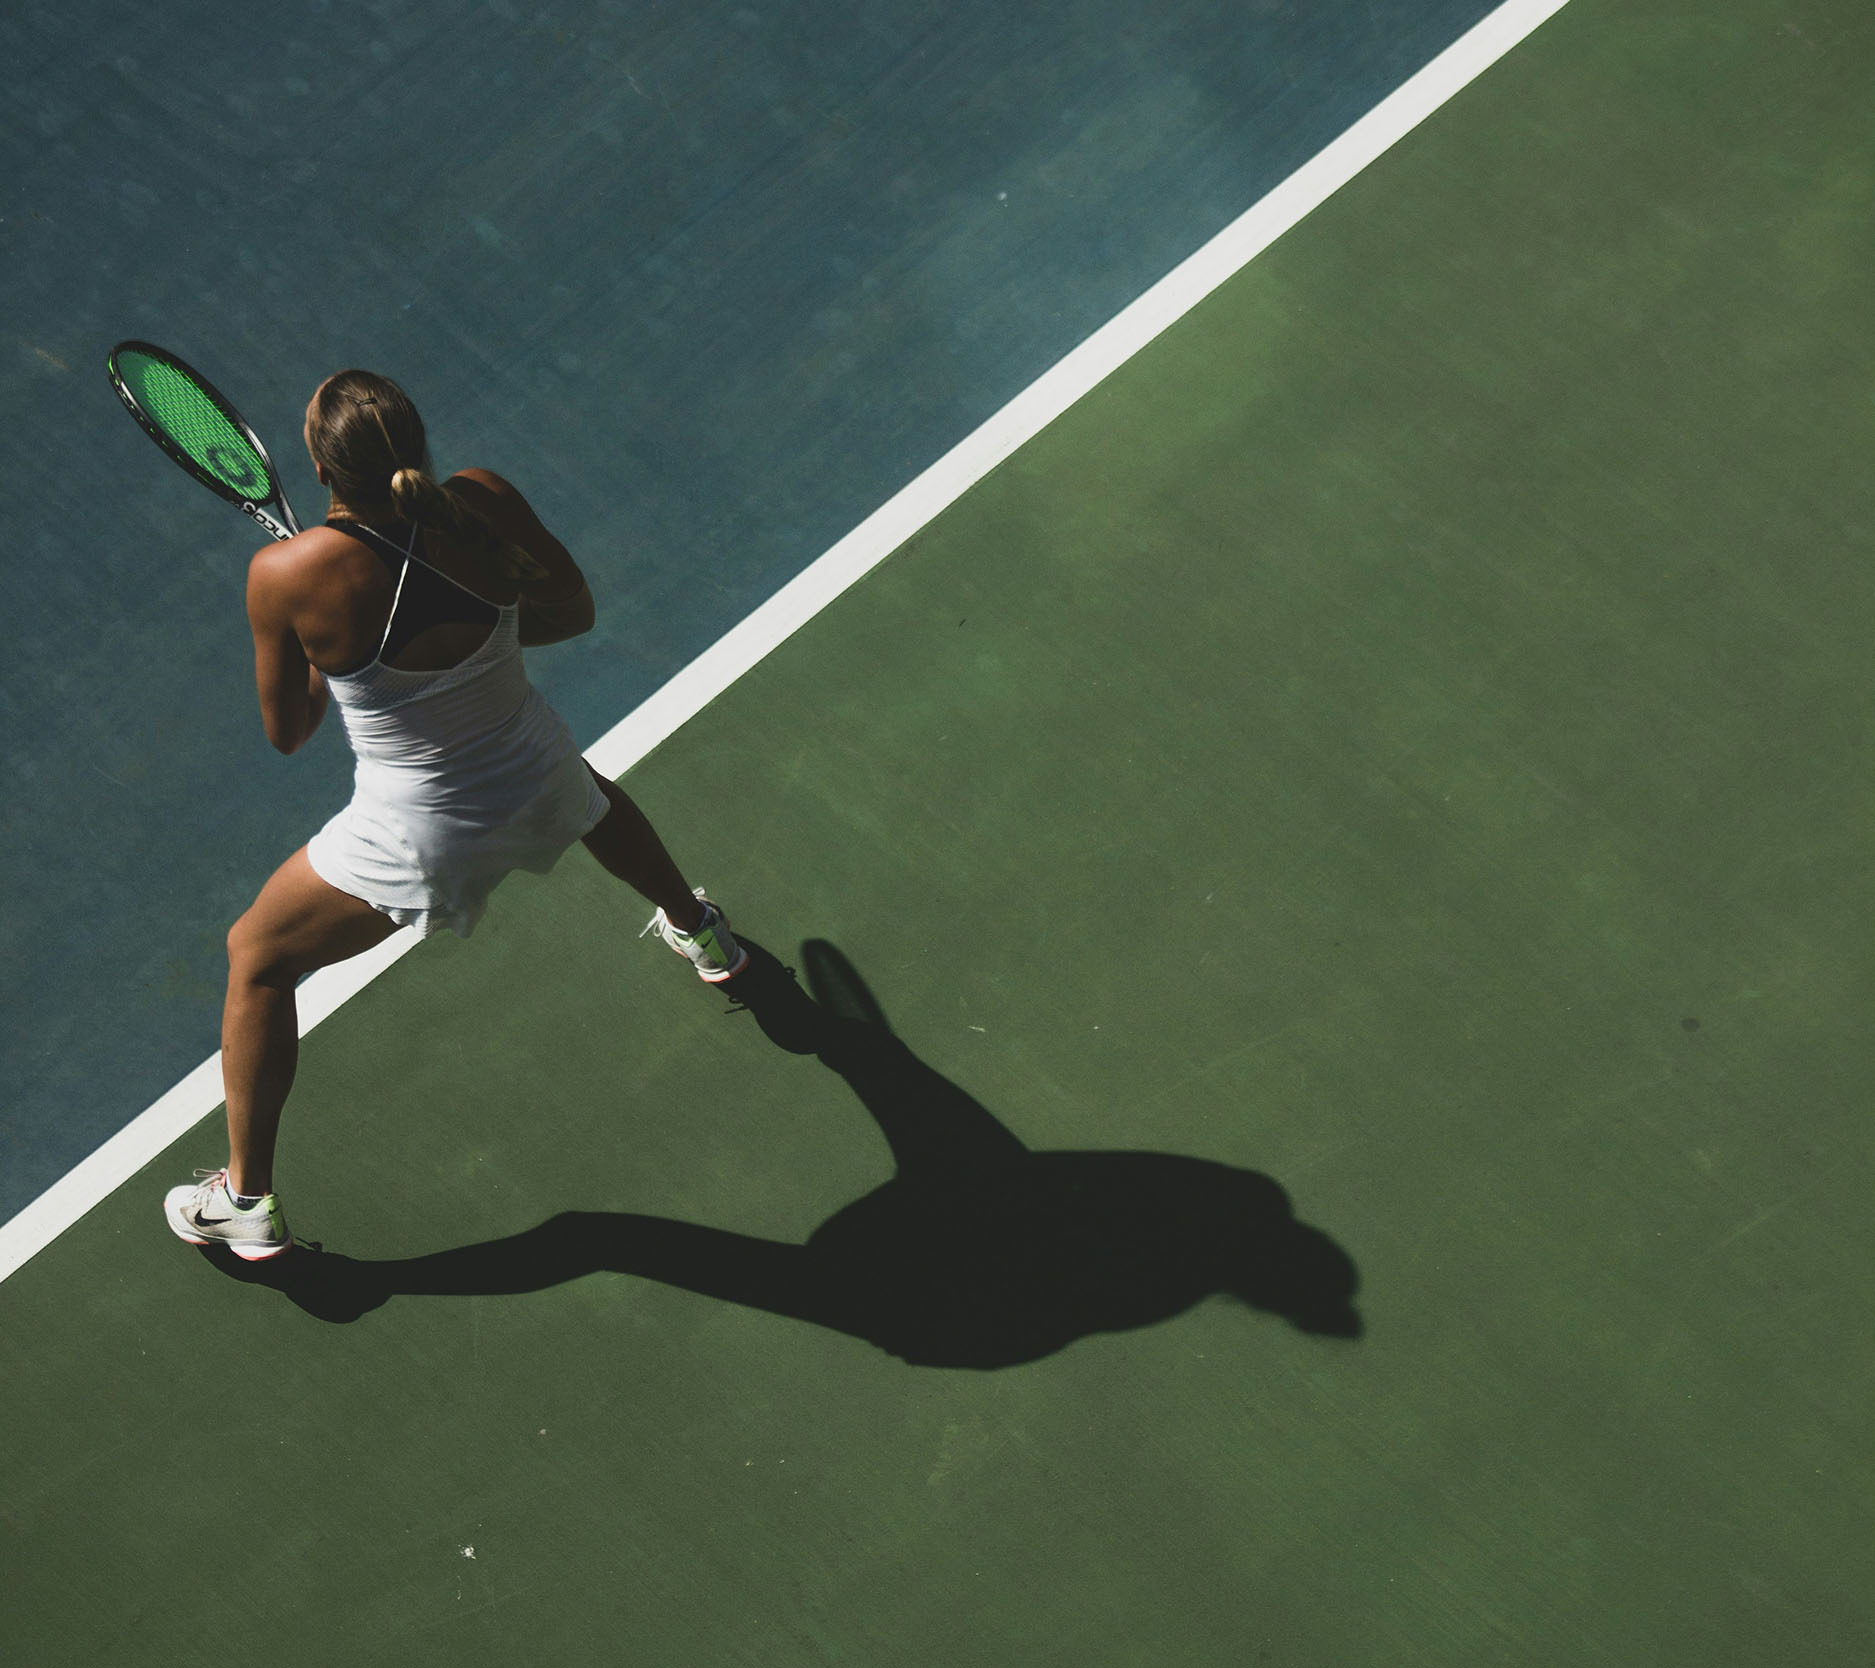 Sheaff Brock market update newsletters, June 2024, overhead shot of woman standing on tennis court with shadow behind her